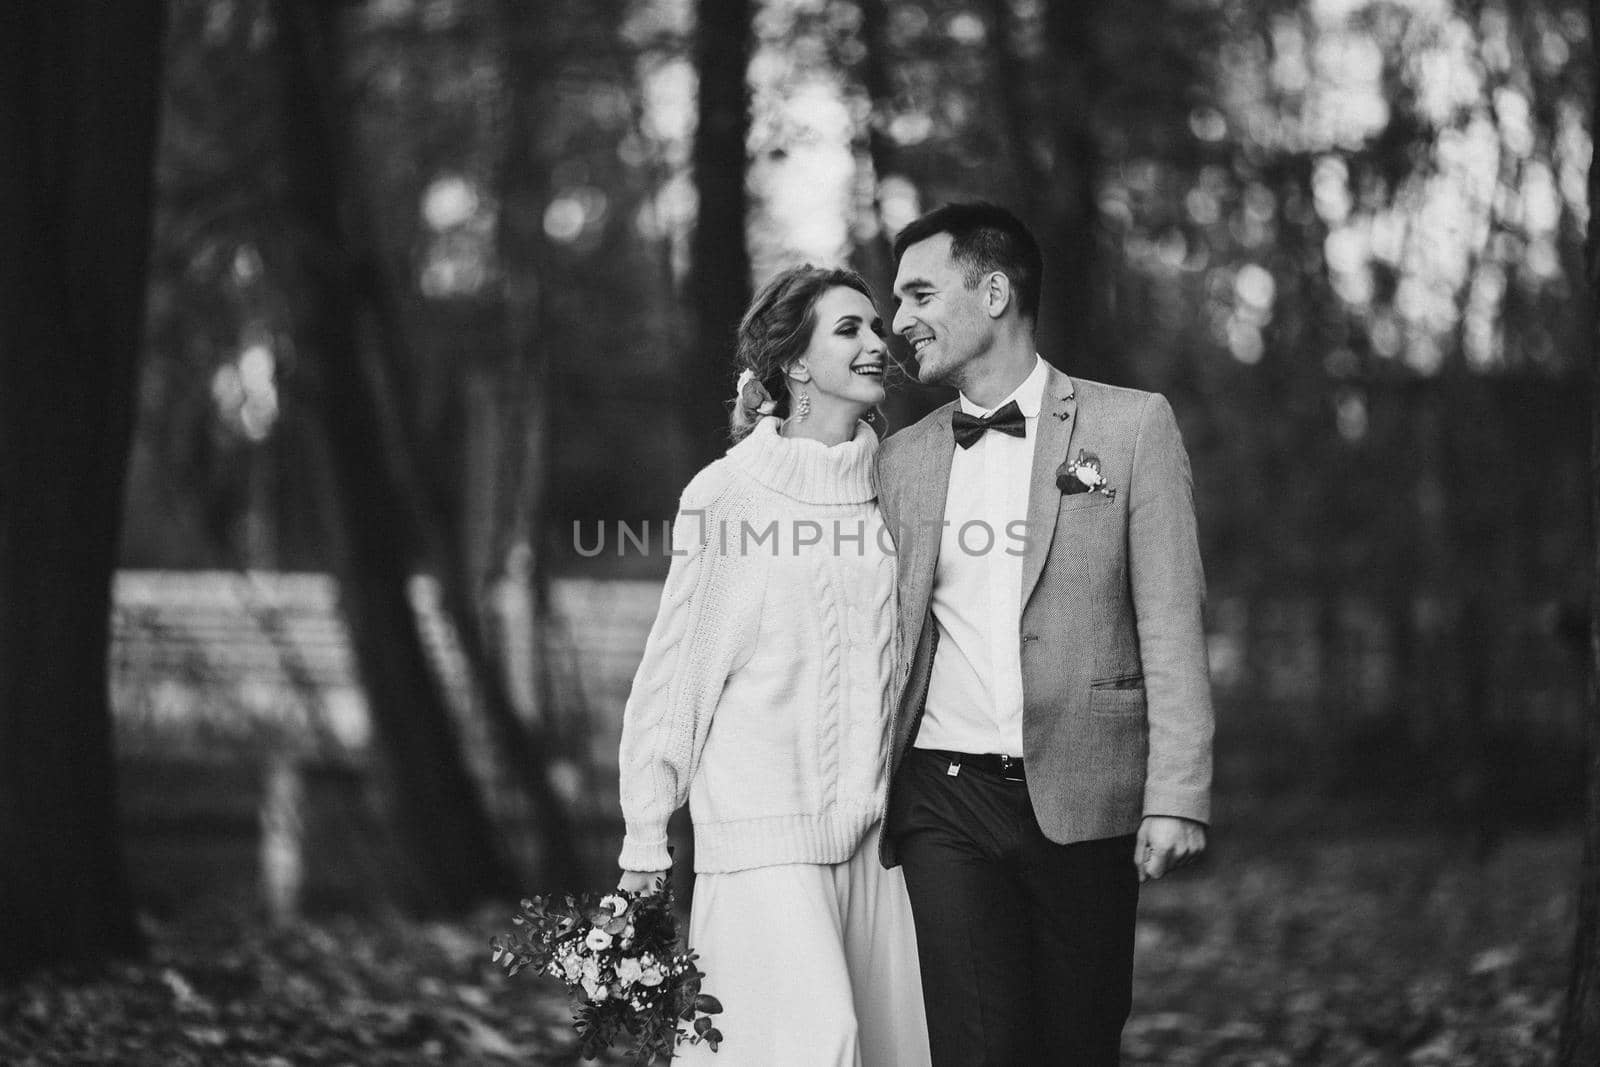 Black and white portrait of cheerful beautiful newlywed couple walking in forest smiling. Bride wearing cute cozy sweater and holding bridal bouquet. Bokeh.